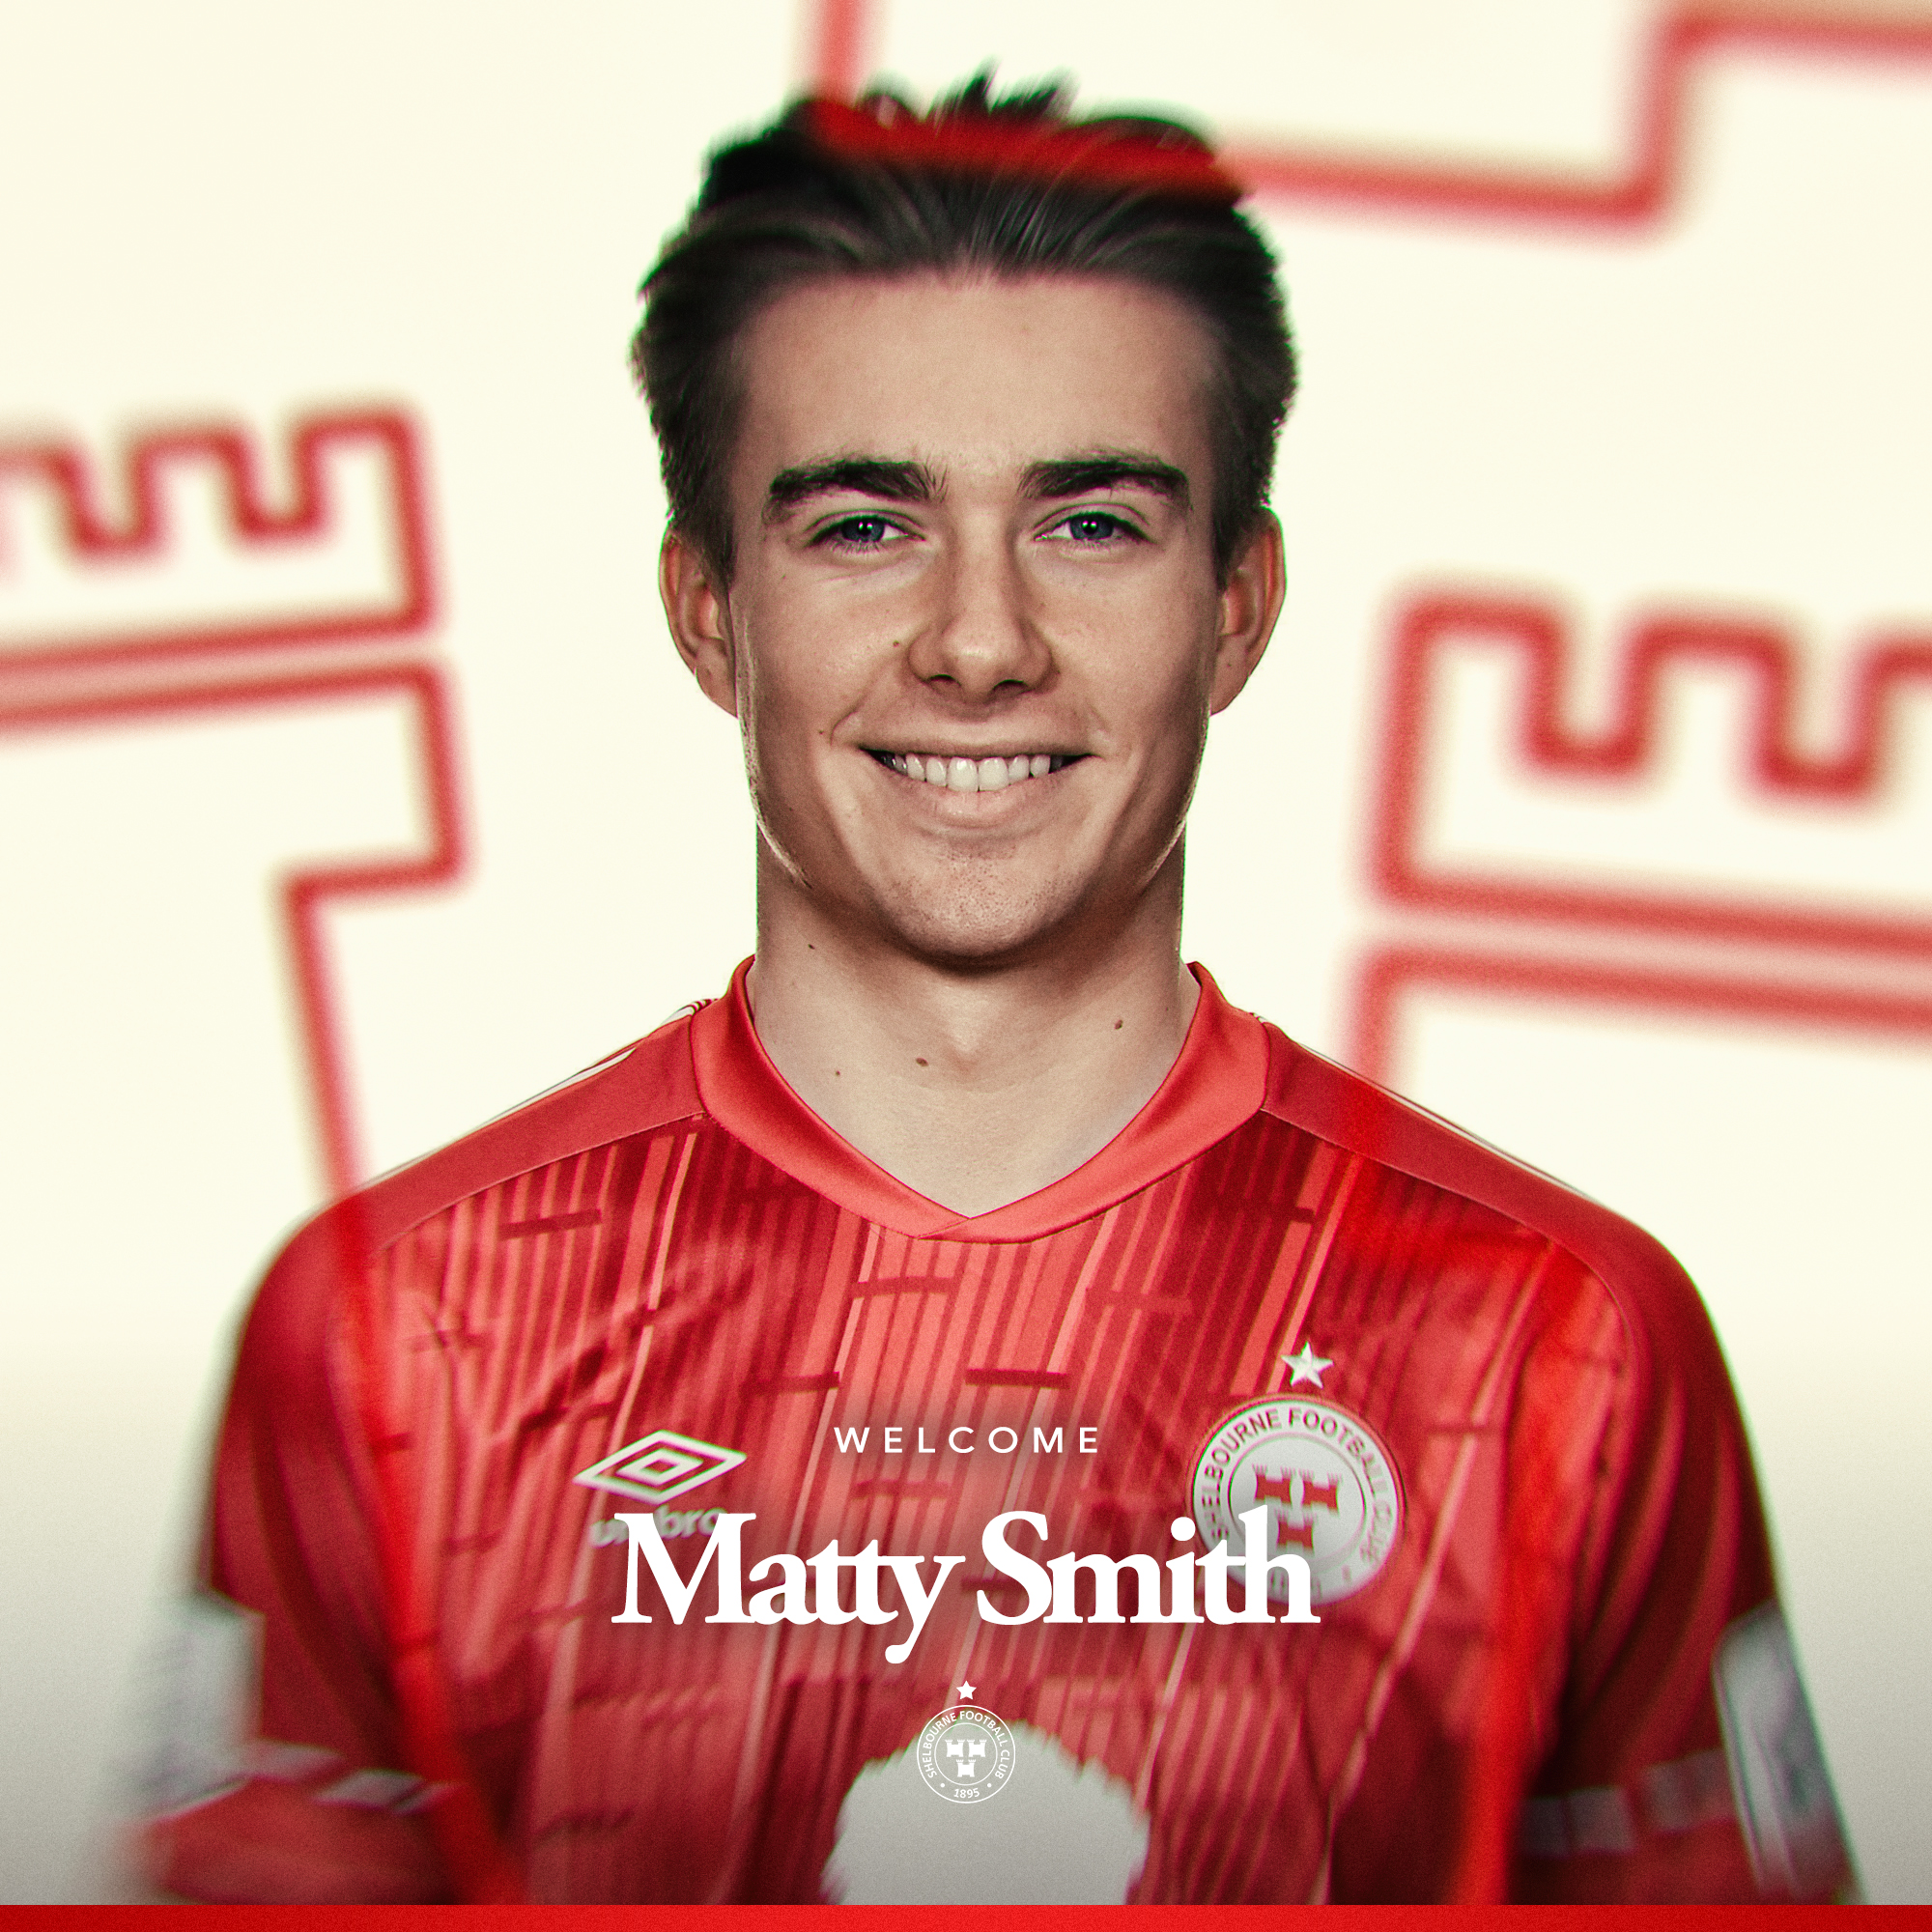 Matty Smith joins the Reds